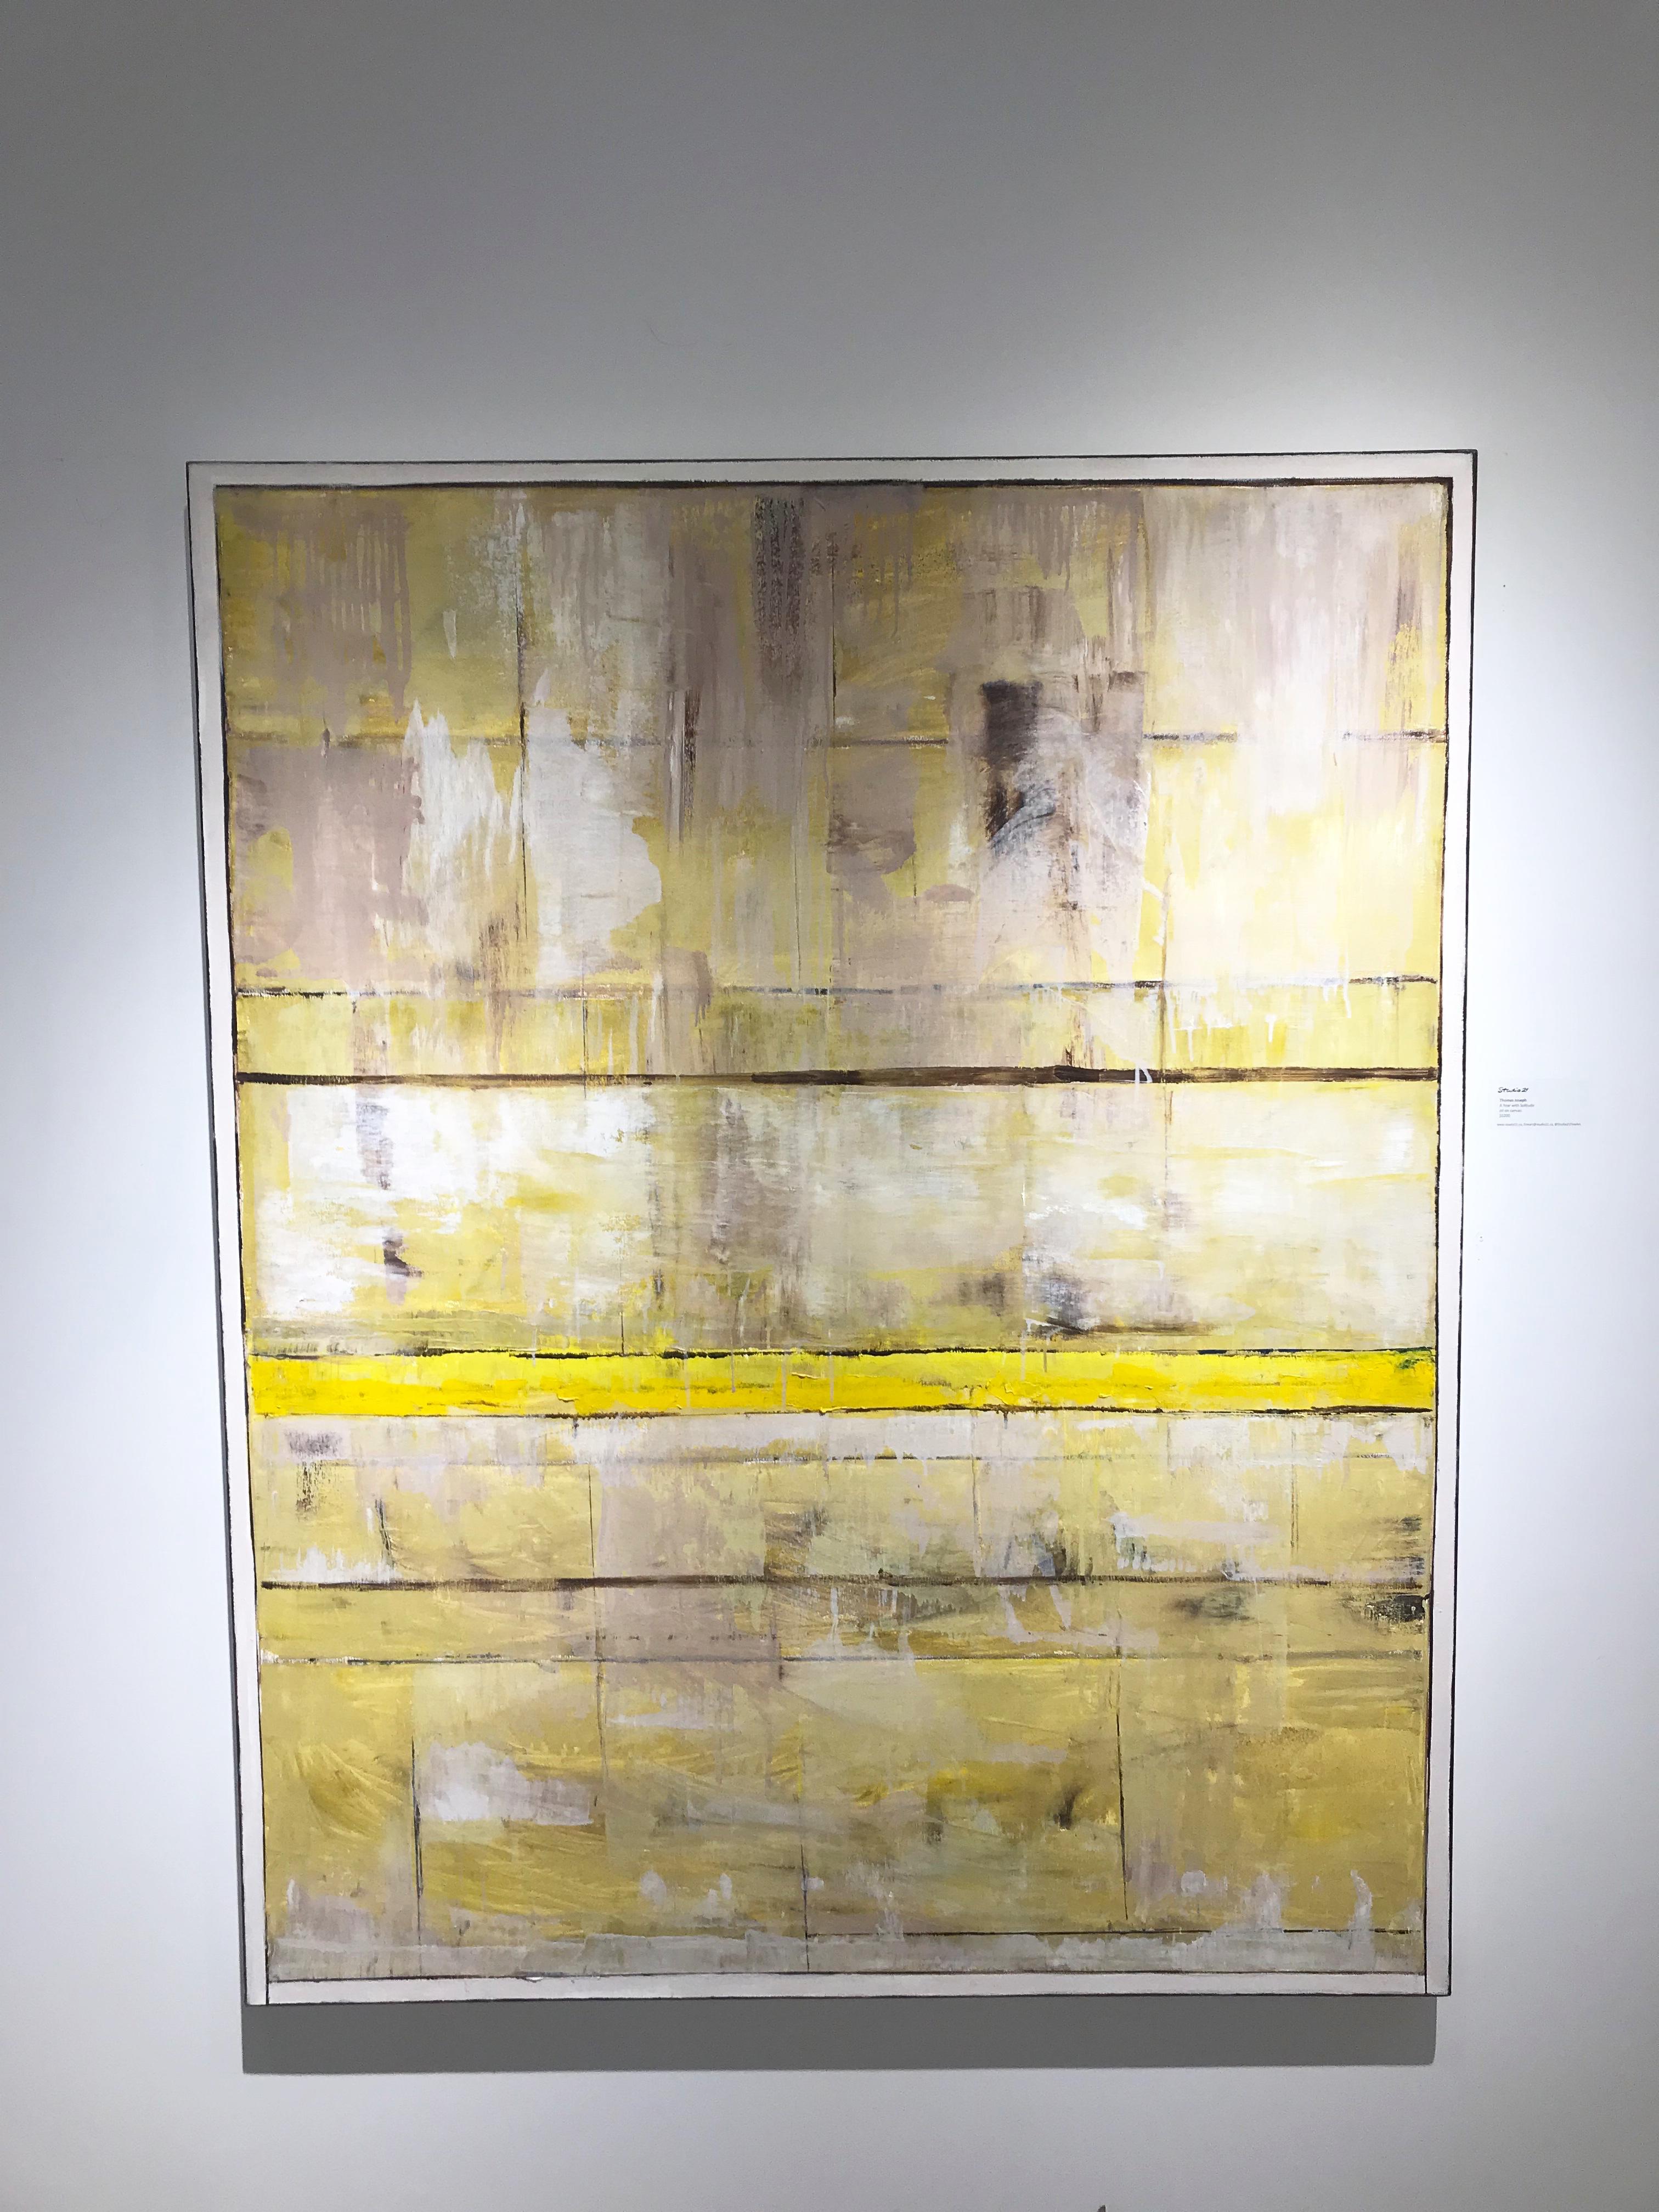 Horizon Passage: Yellow, White, Umber, abstract oil painting on canvas - Abstract Painting by David Sorensen